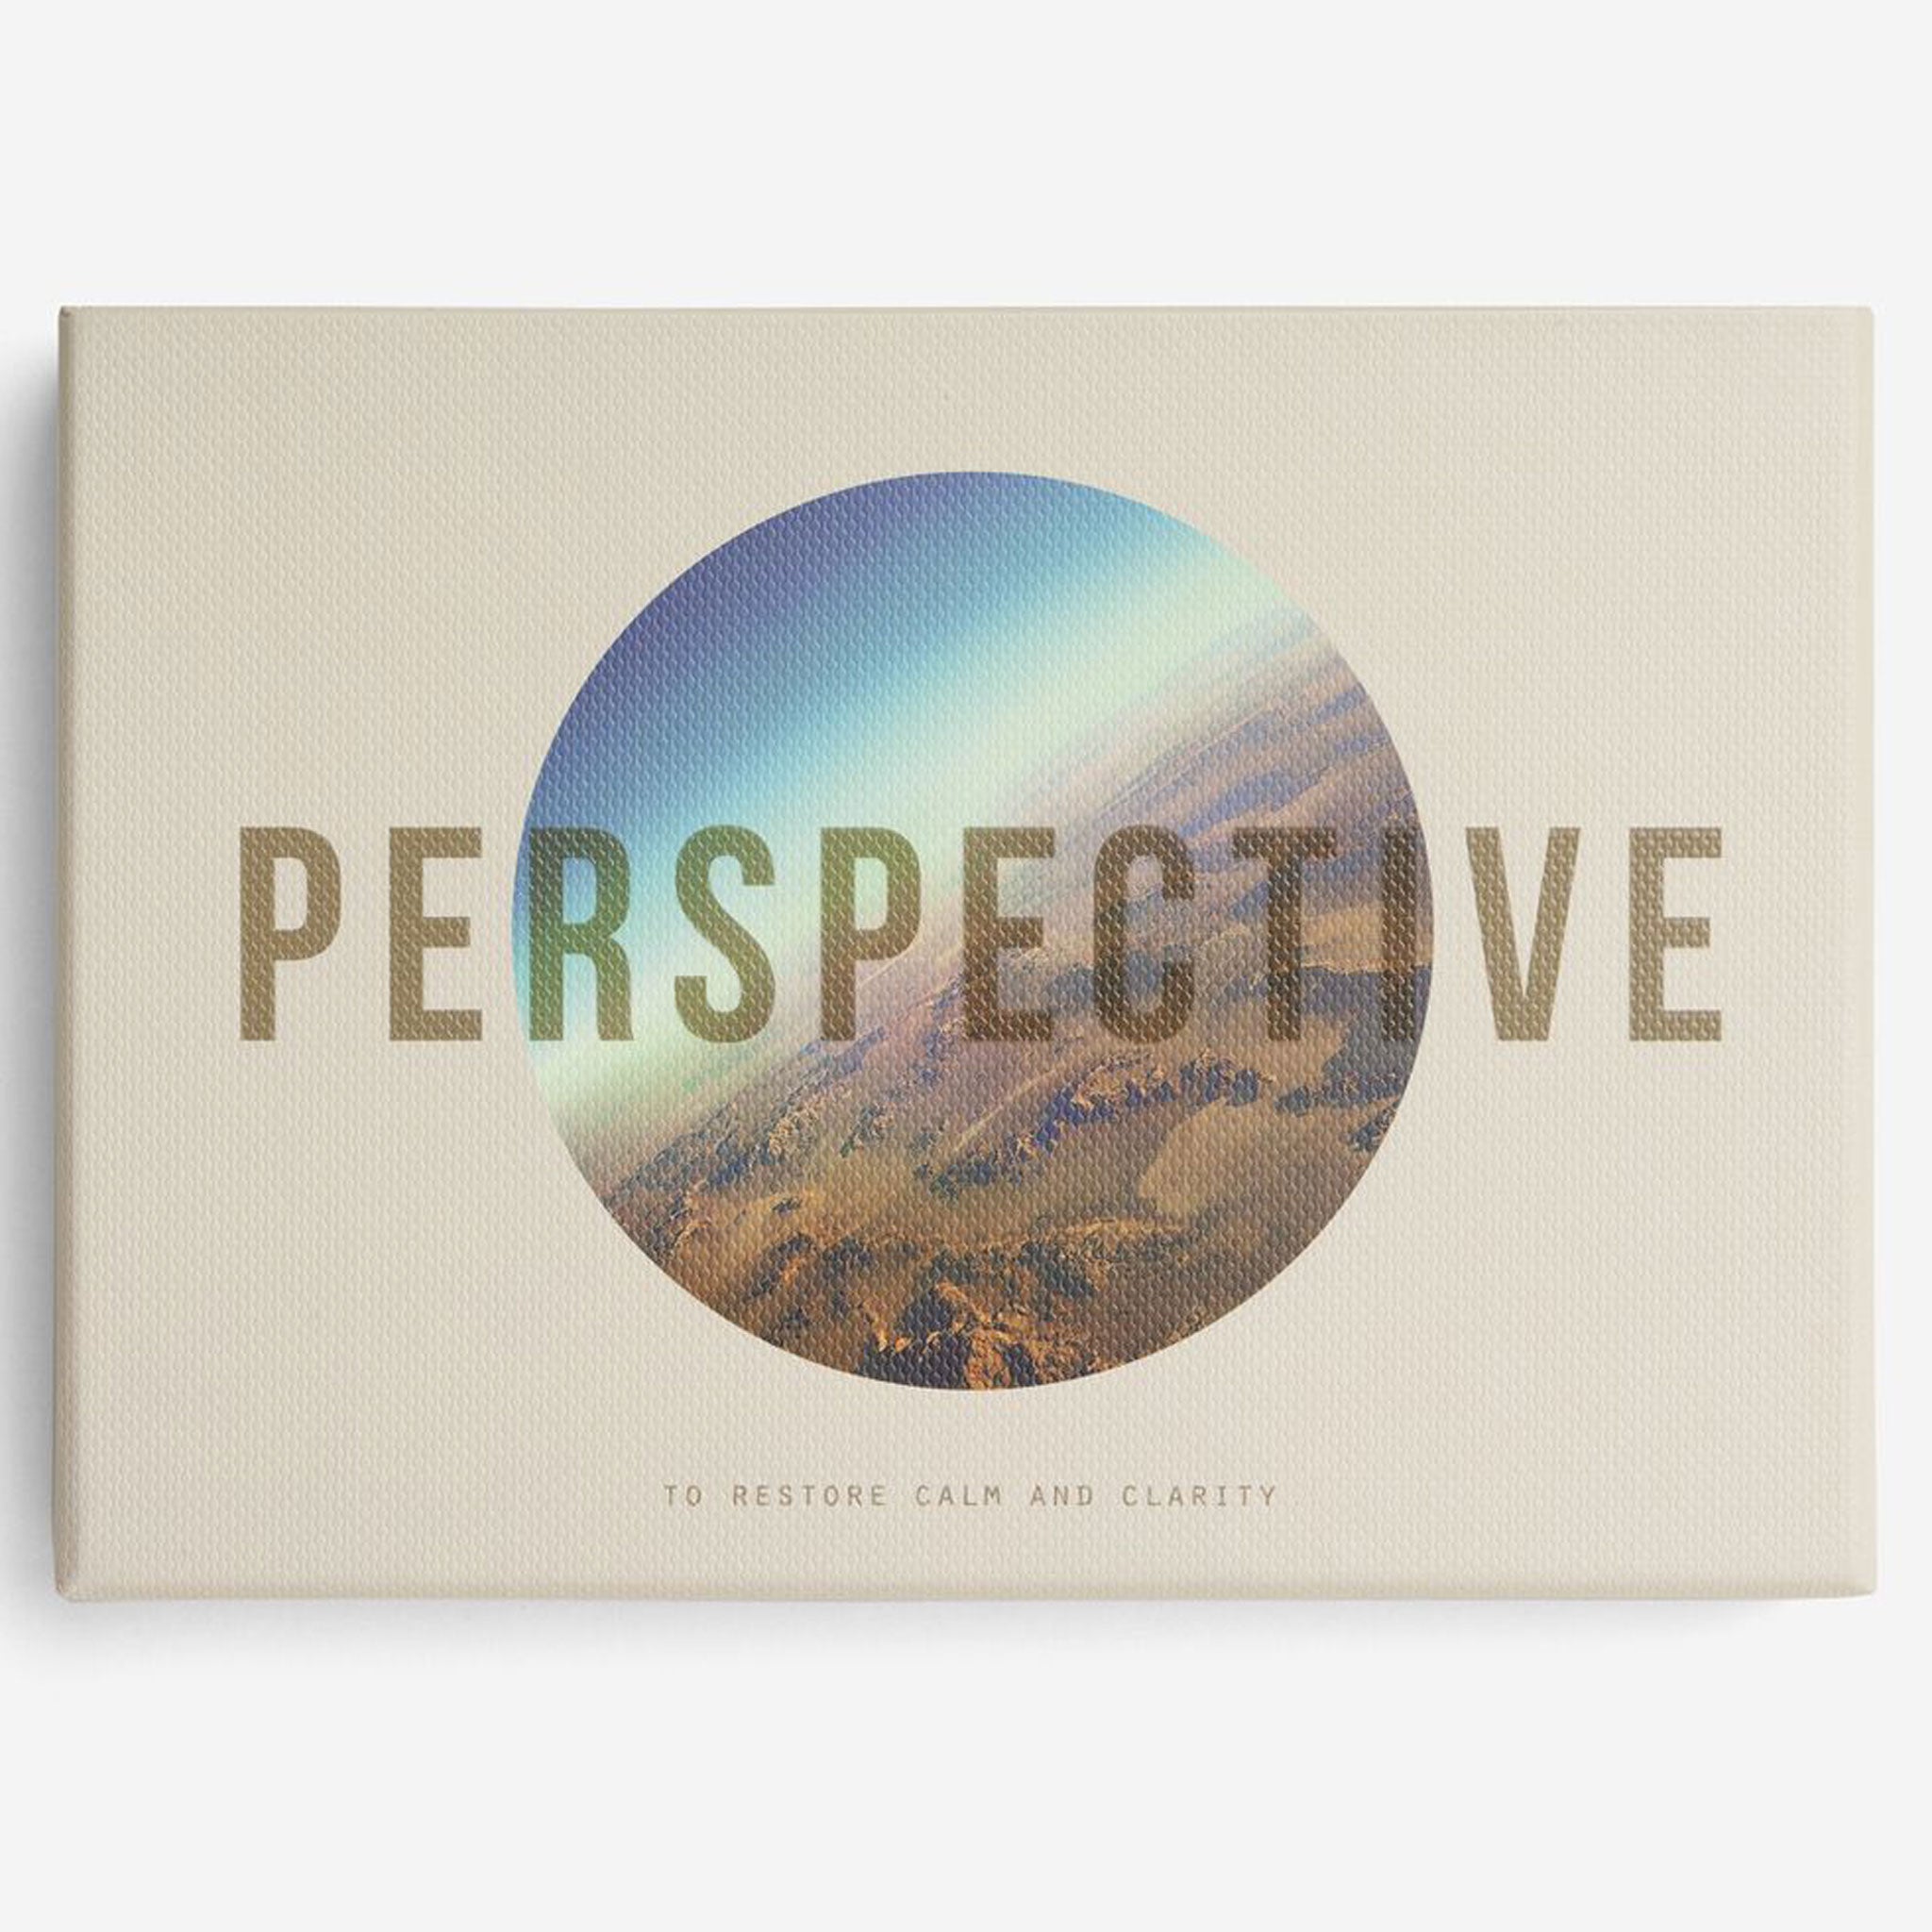 CARDS FOR PERSPECTIVE | 20er KARTEN-SET | English Edition | The School of Life